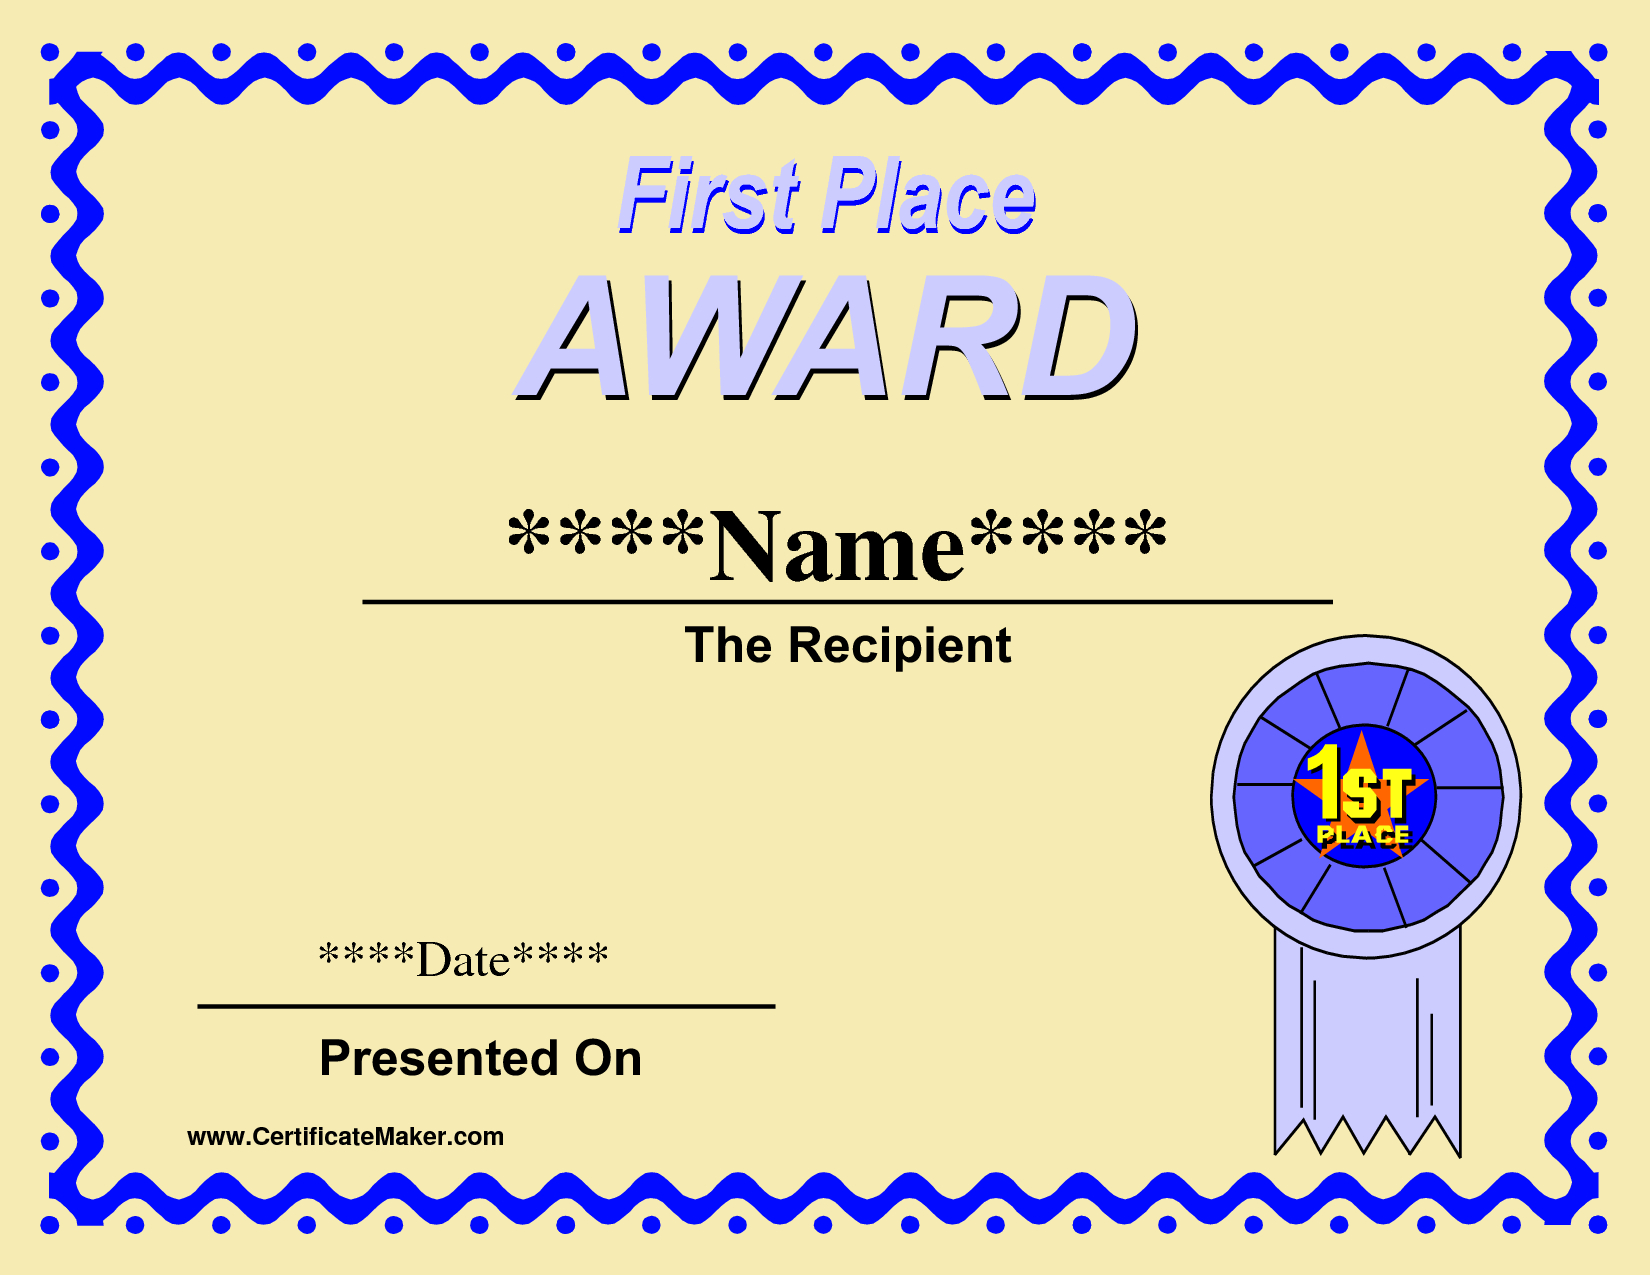 Qualified 1St Place Award Certificate Template With Yellow Regarding First Place Award Certificate Template